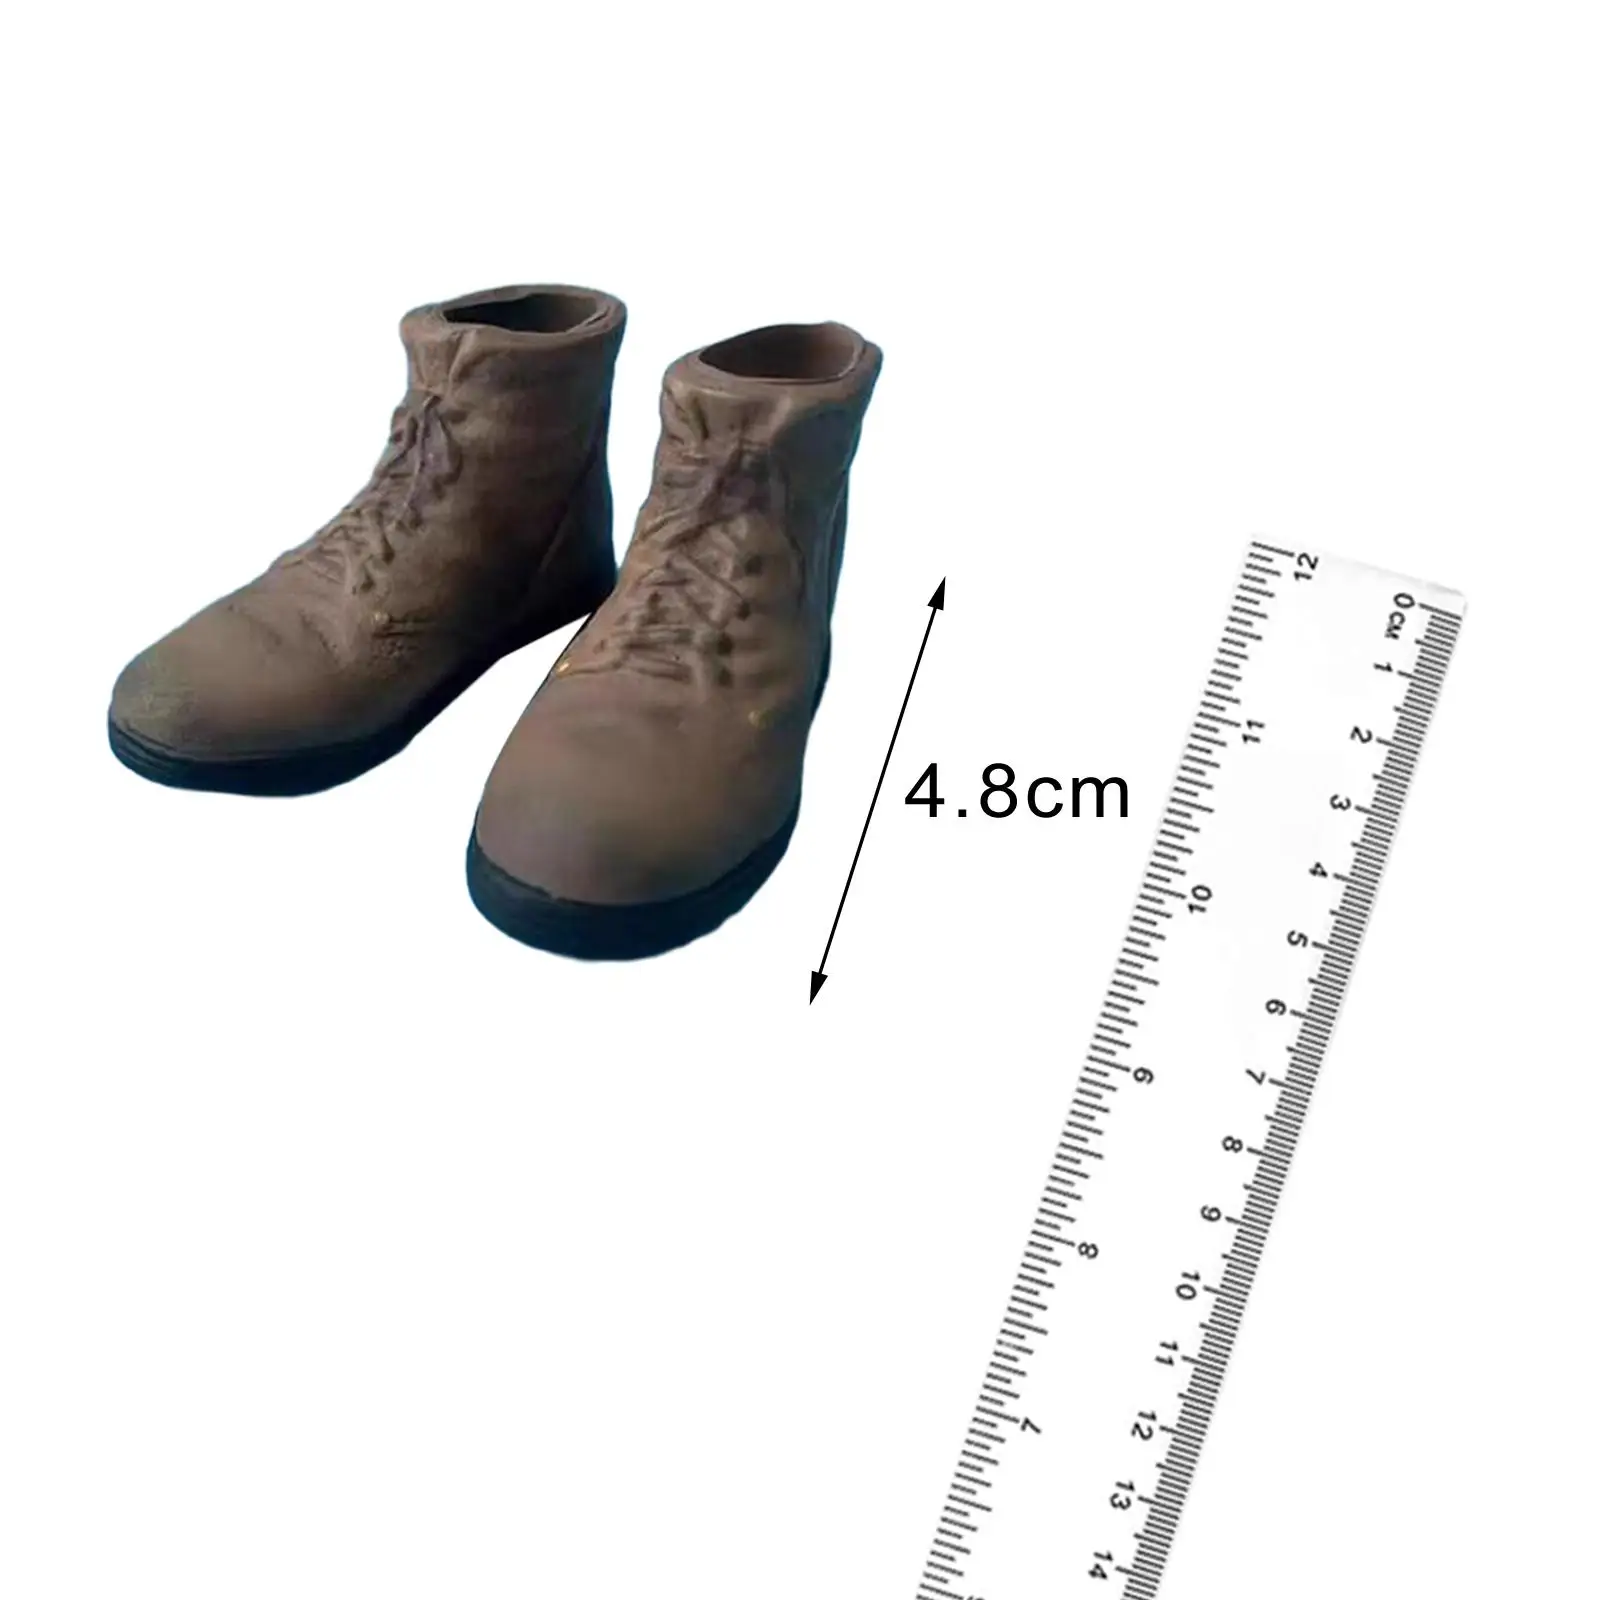 1/6 Scale Action Figure US Soldier Shoes Kids Toy Adults Gifts Fashion 12 inch Male Doll Shoes for 12